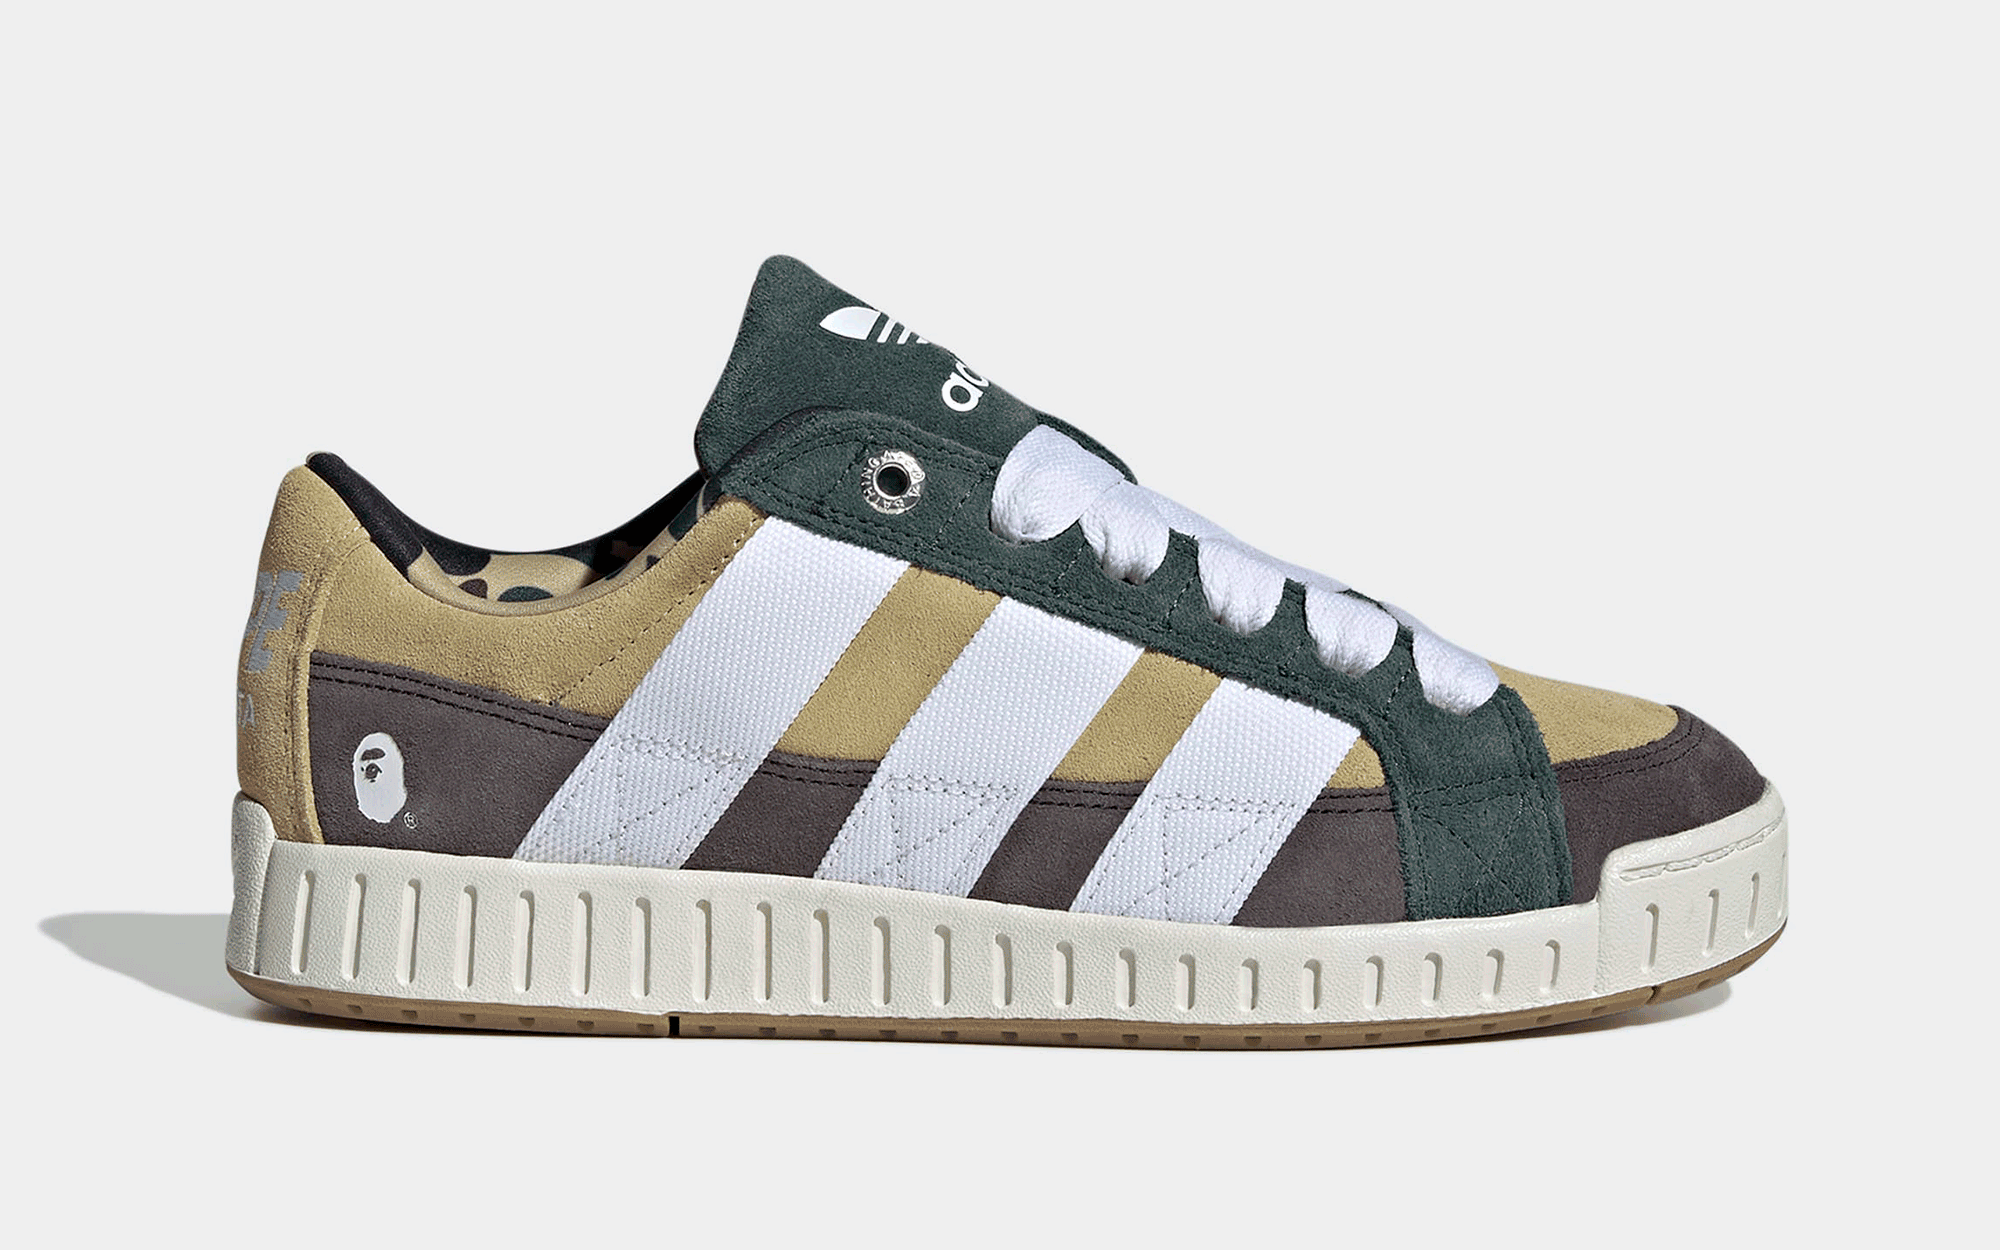 The Adidas clearance N Bape Sneakers Release April 18